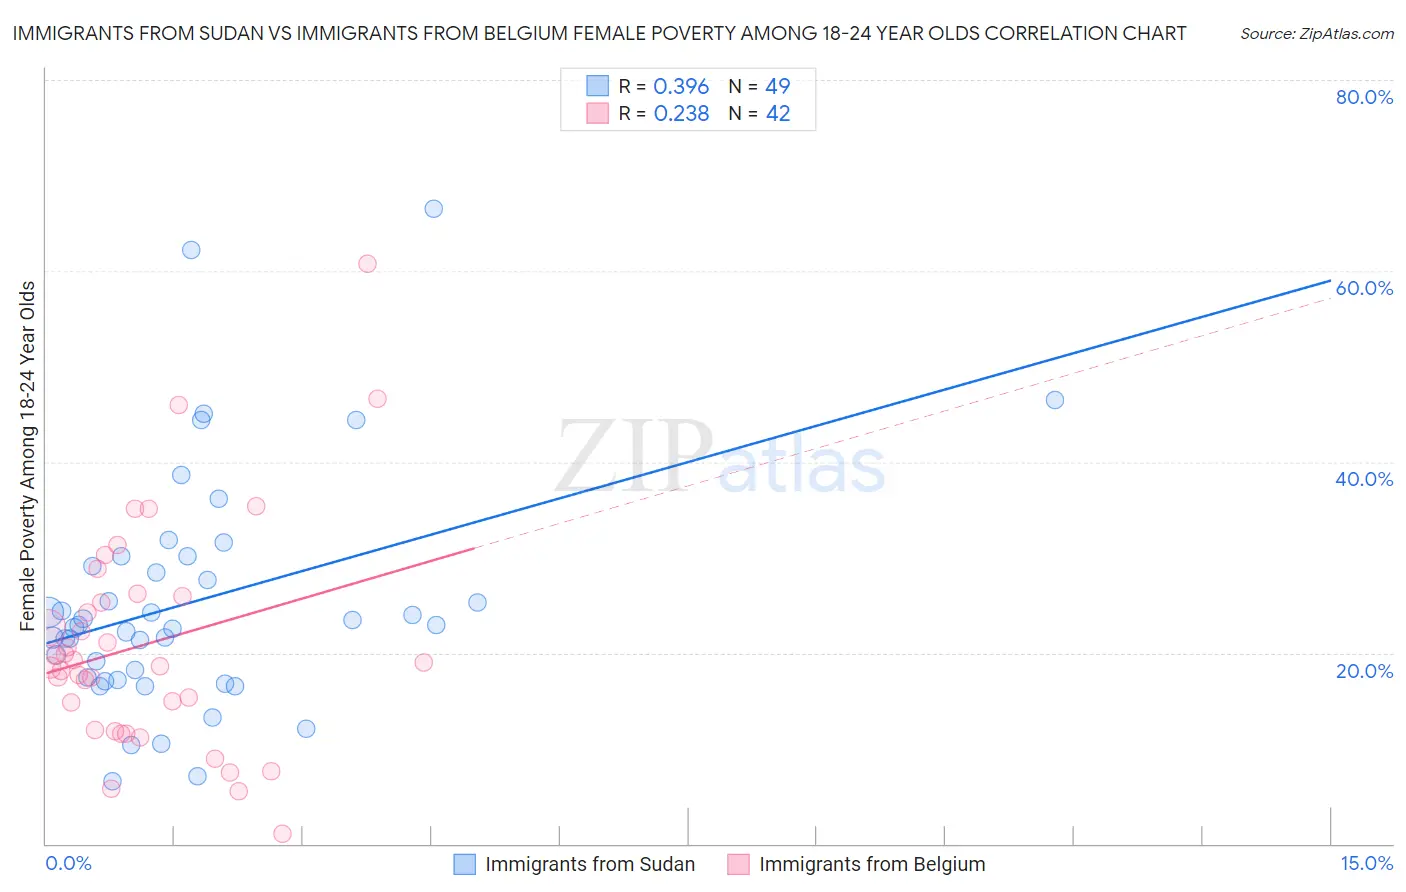 Immigrants from Sudan vs Immigrants from Belgium Female Poverty Among 18-24 Year Olds